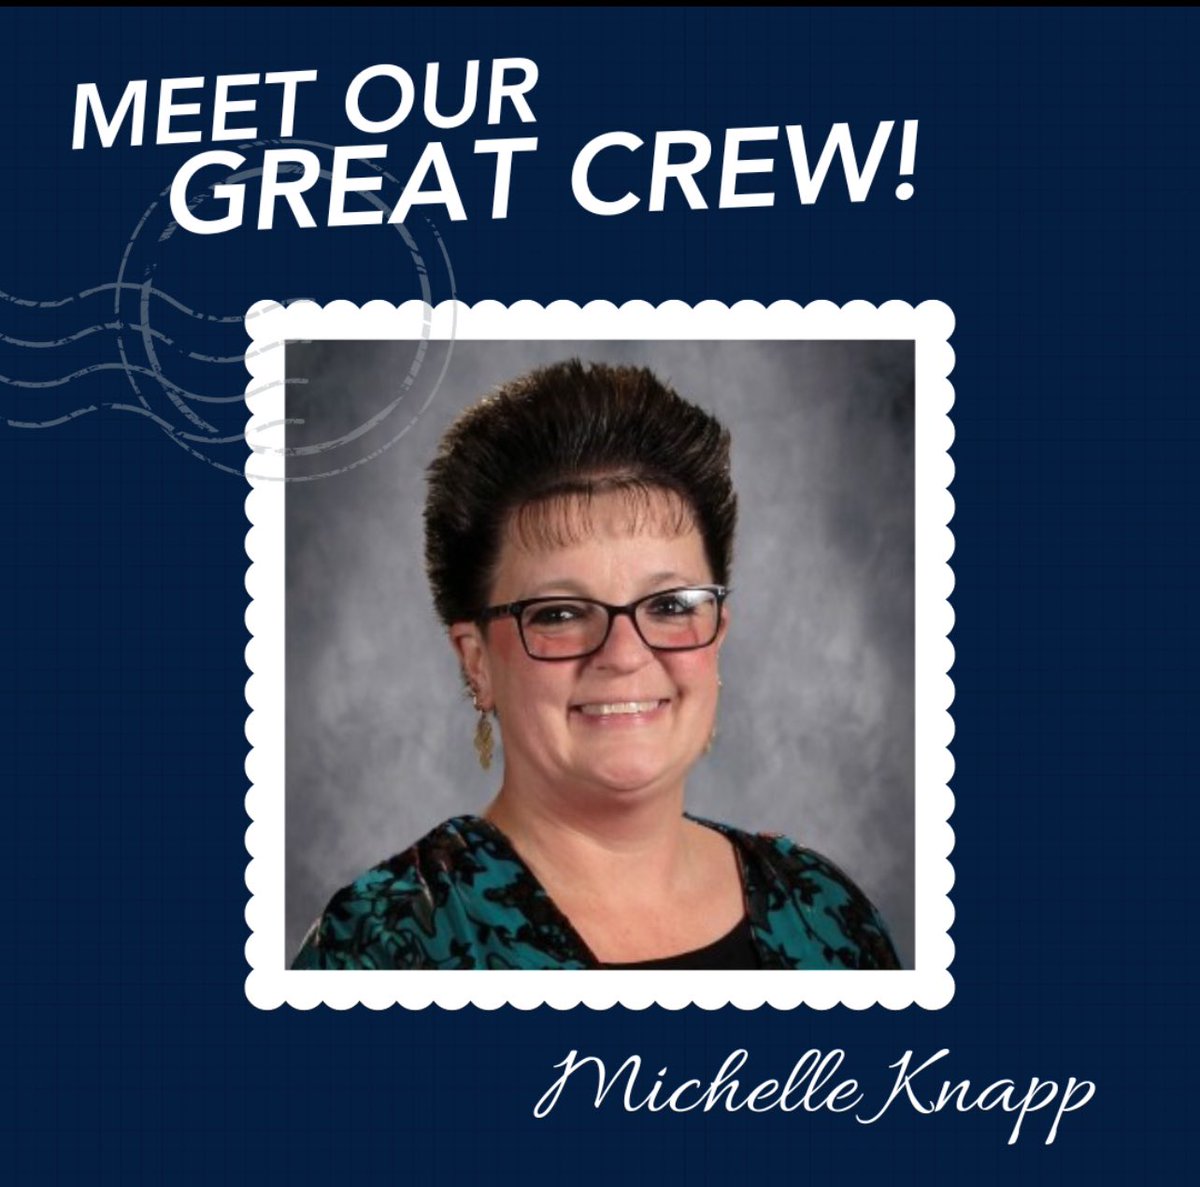 Michelle Knapp works hard to support students inside & outside of the 6:1:1 classroom she works in at Walt Disney Elementary School. She ensures they have access to clubs & other opportunities throughout the school year #GCPride #GCCares